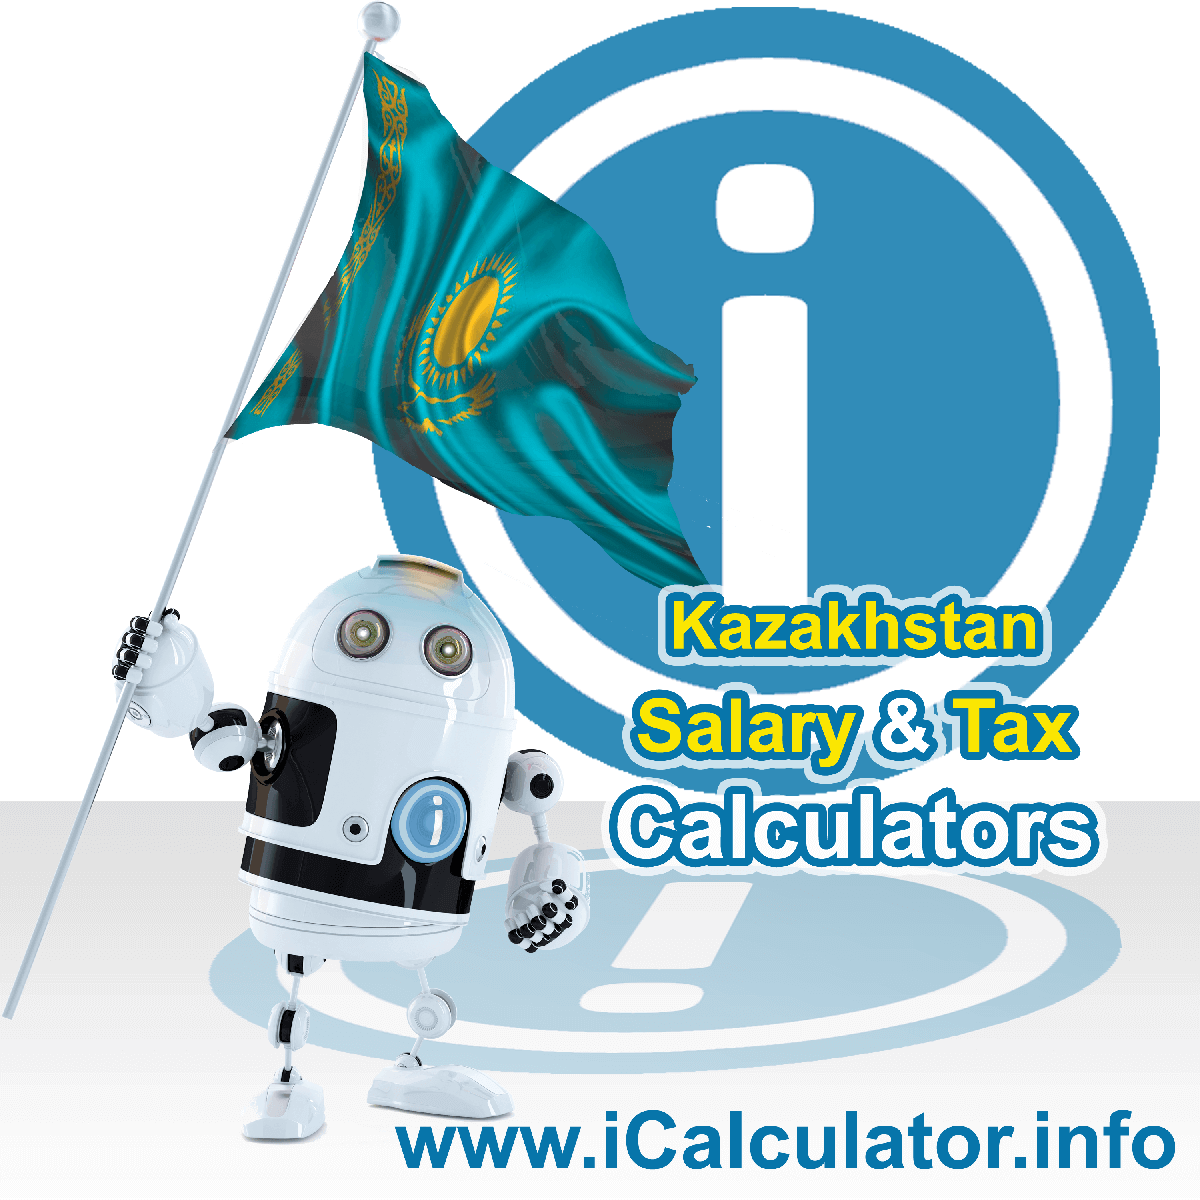 Kazakhstan Salary Calculator. This image shows the Kazakhstanese flag and information relating to the tax formula for the Kazakhstan Tax Calculator